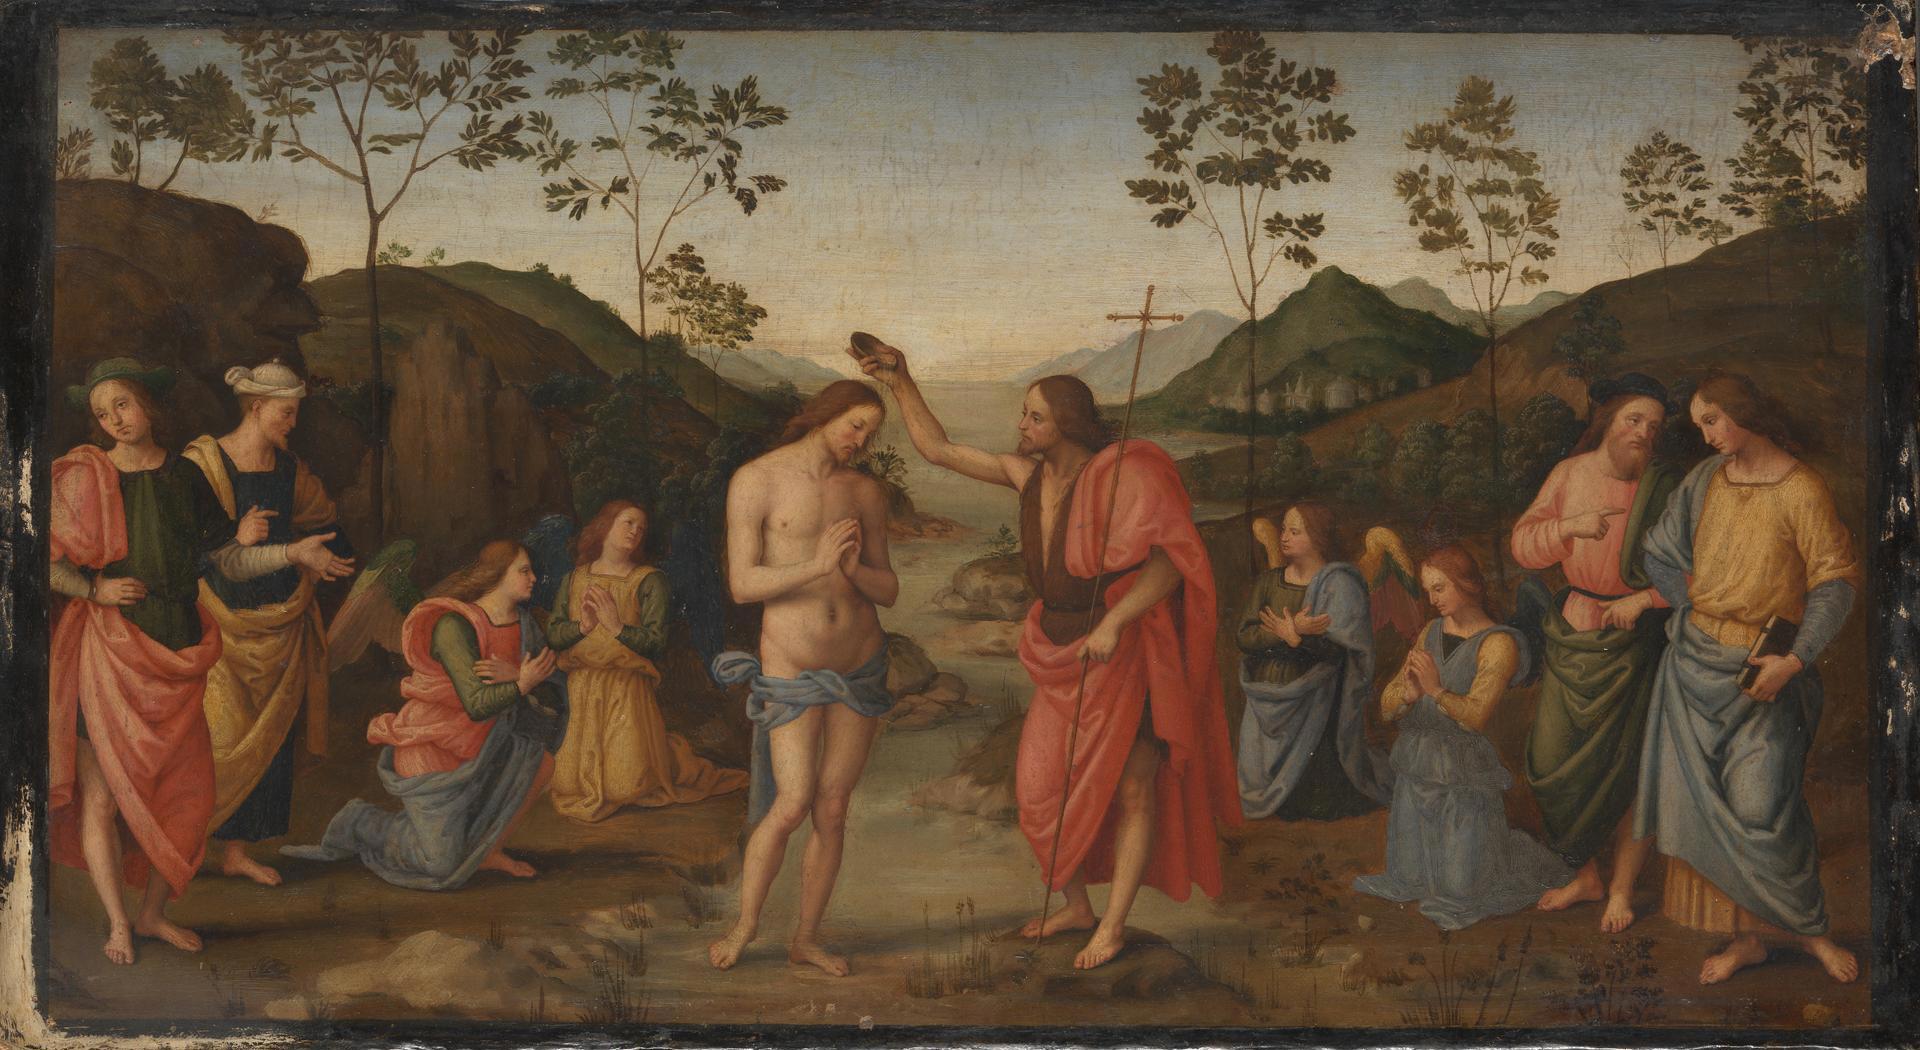 The Baptism of Christ by probably by Sassoferrato, after Pietro Perugino